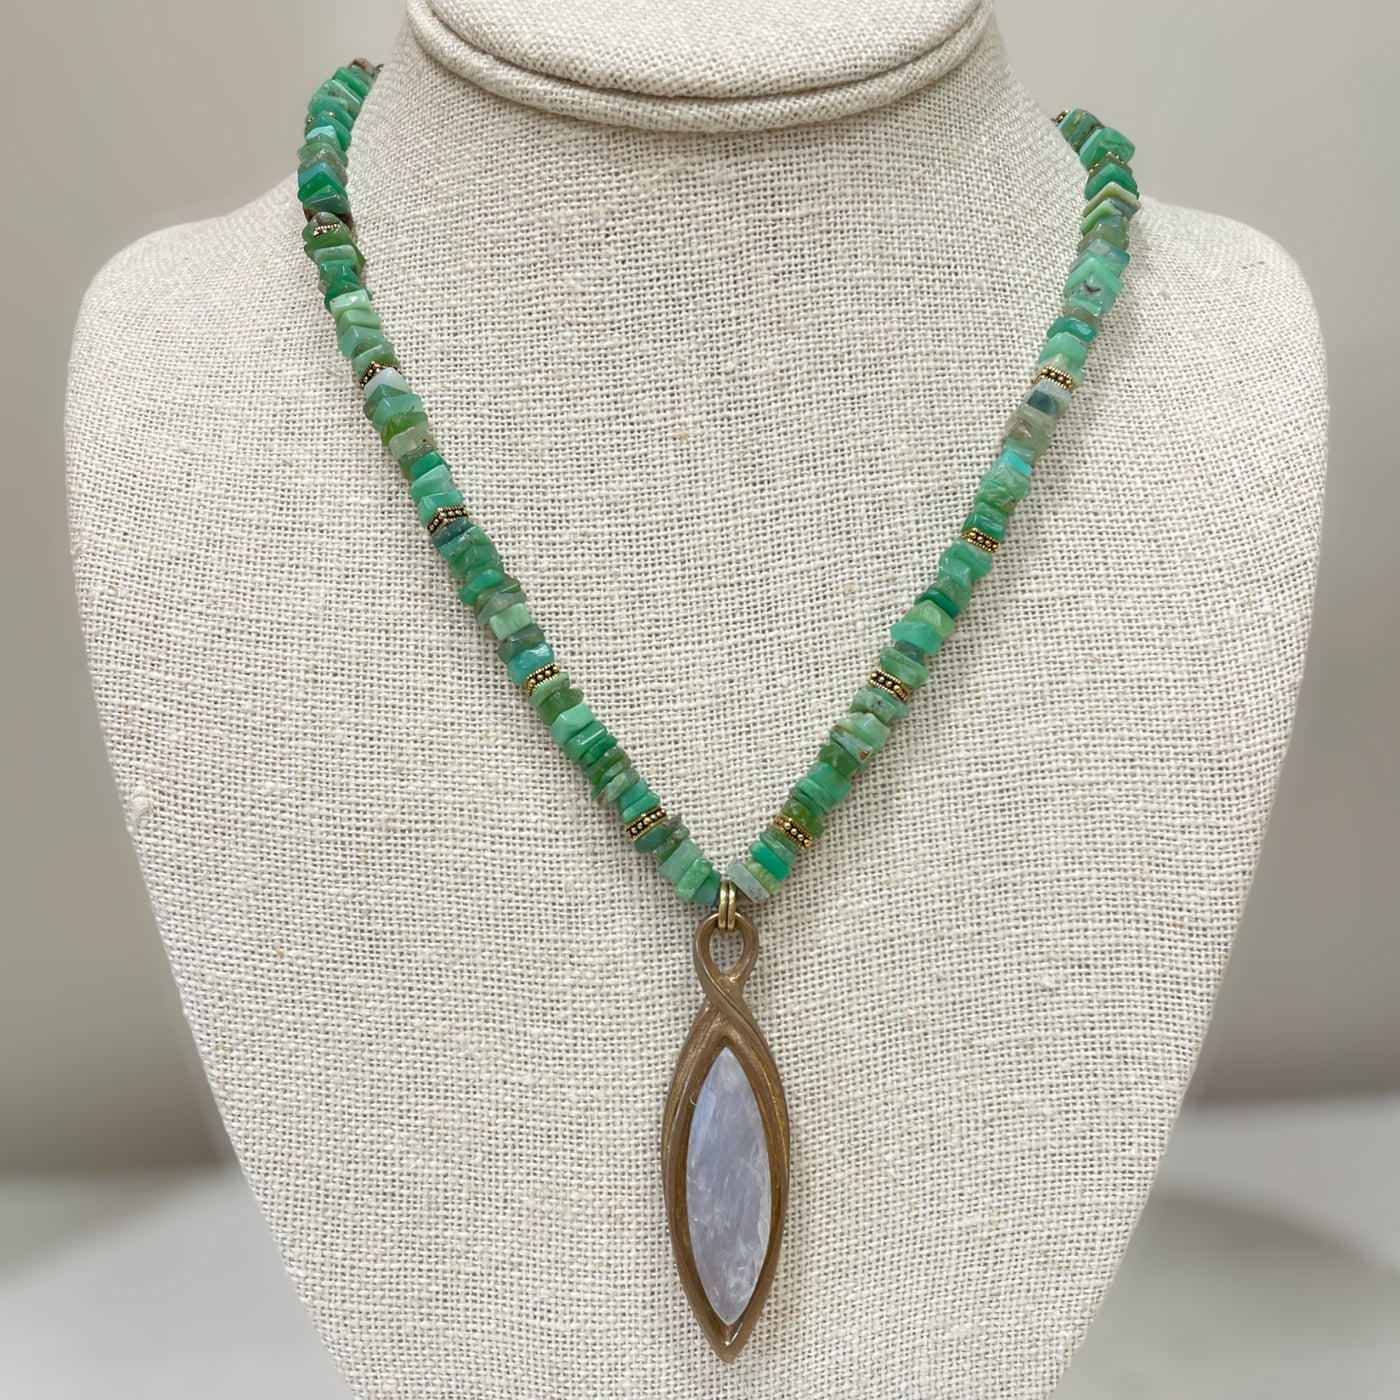 Necklace with Amazonite and Moonstone